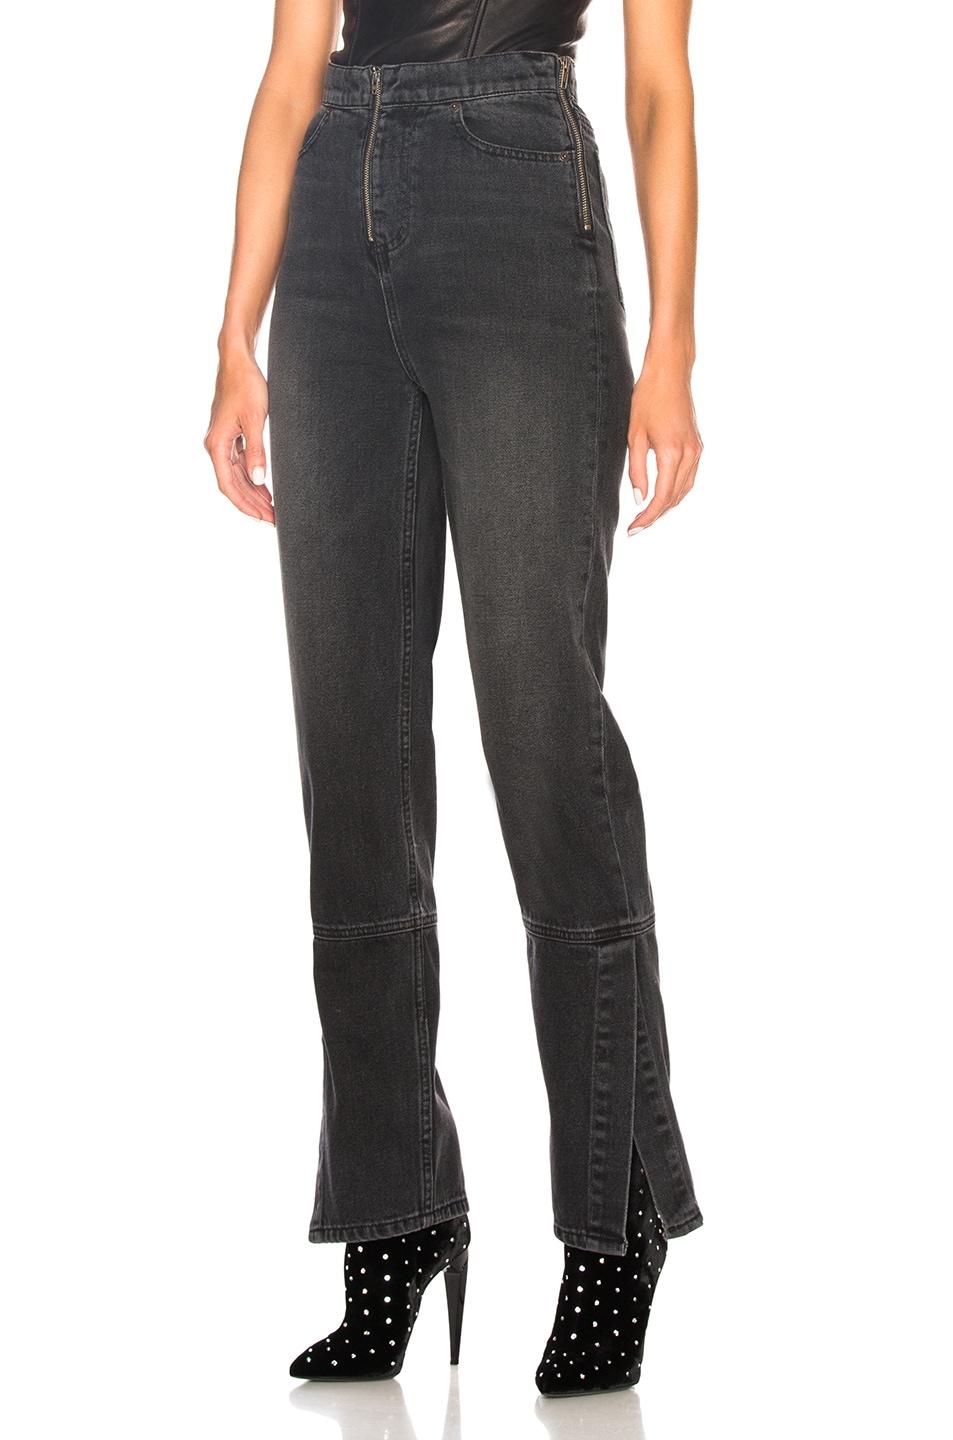 Image 1 of TRE by Natalie Ratabesi Fiona Bootcut in Vintage Black